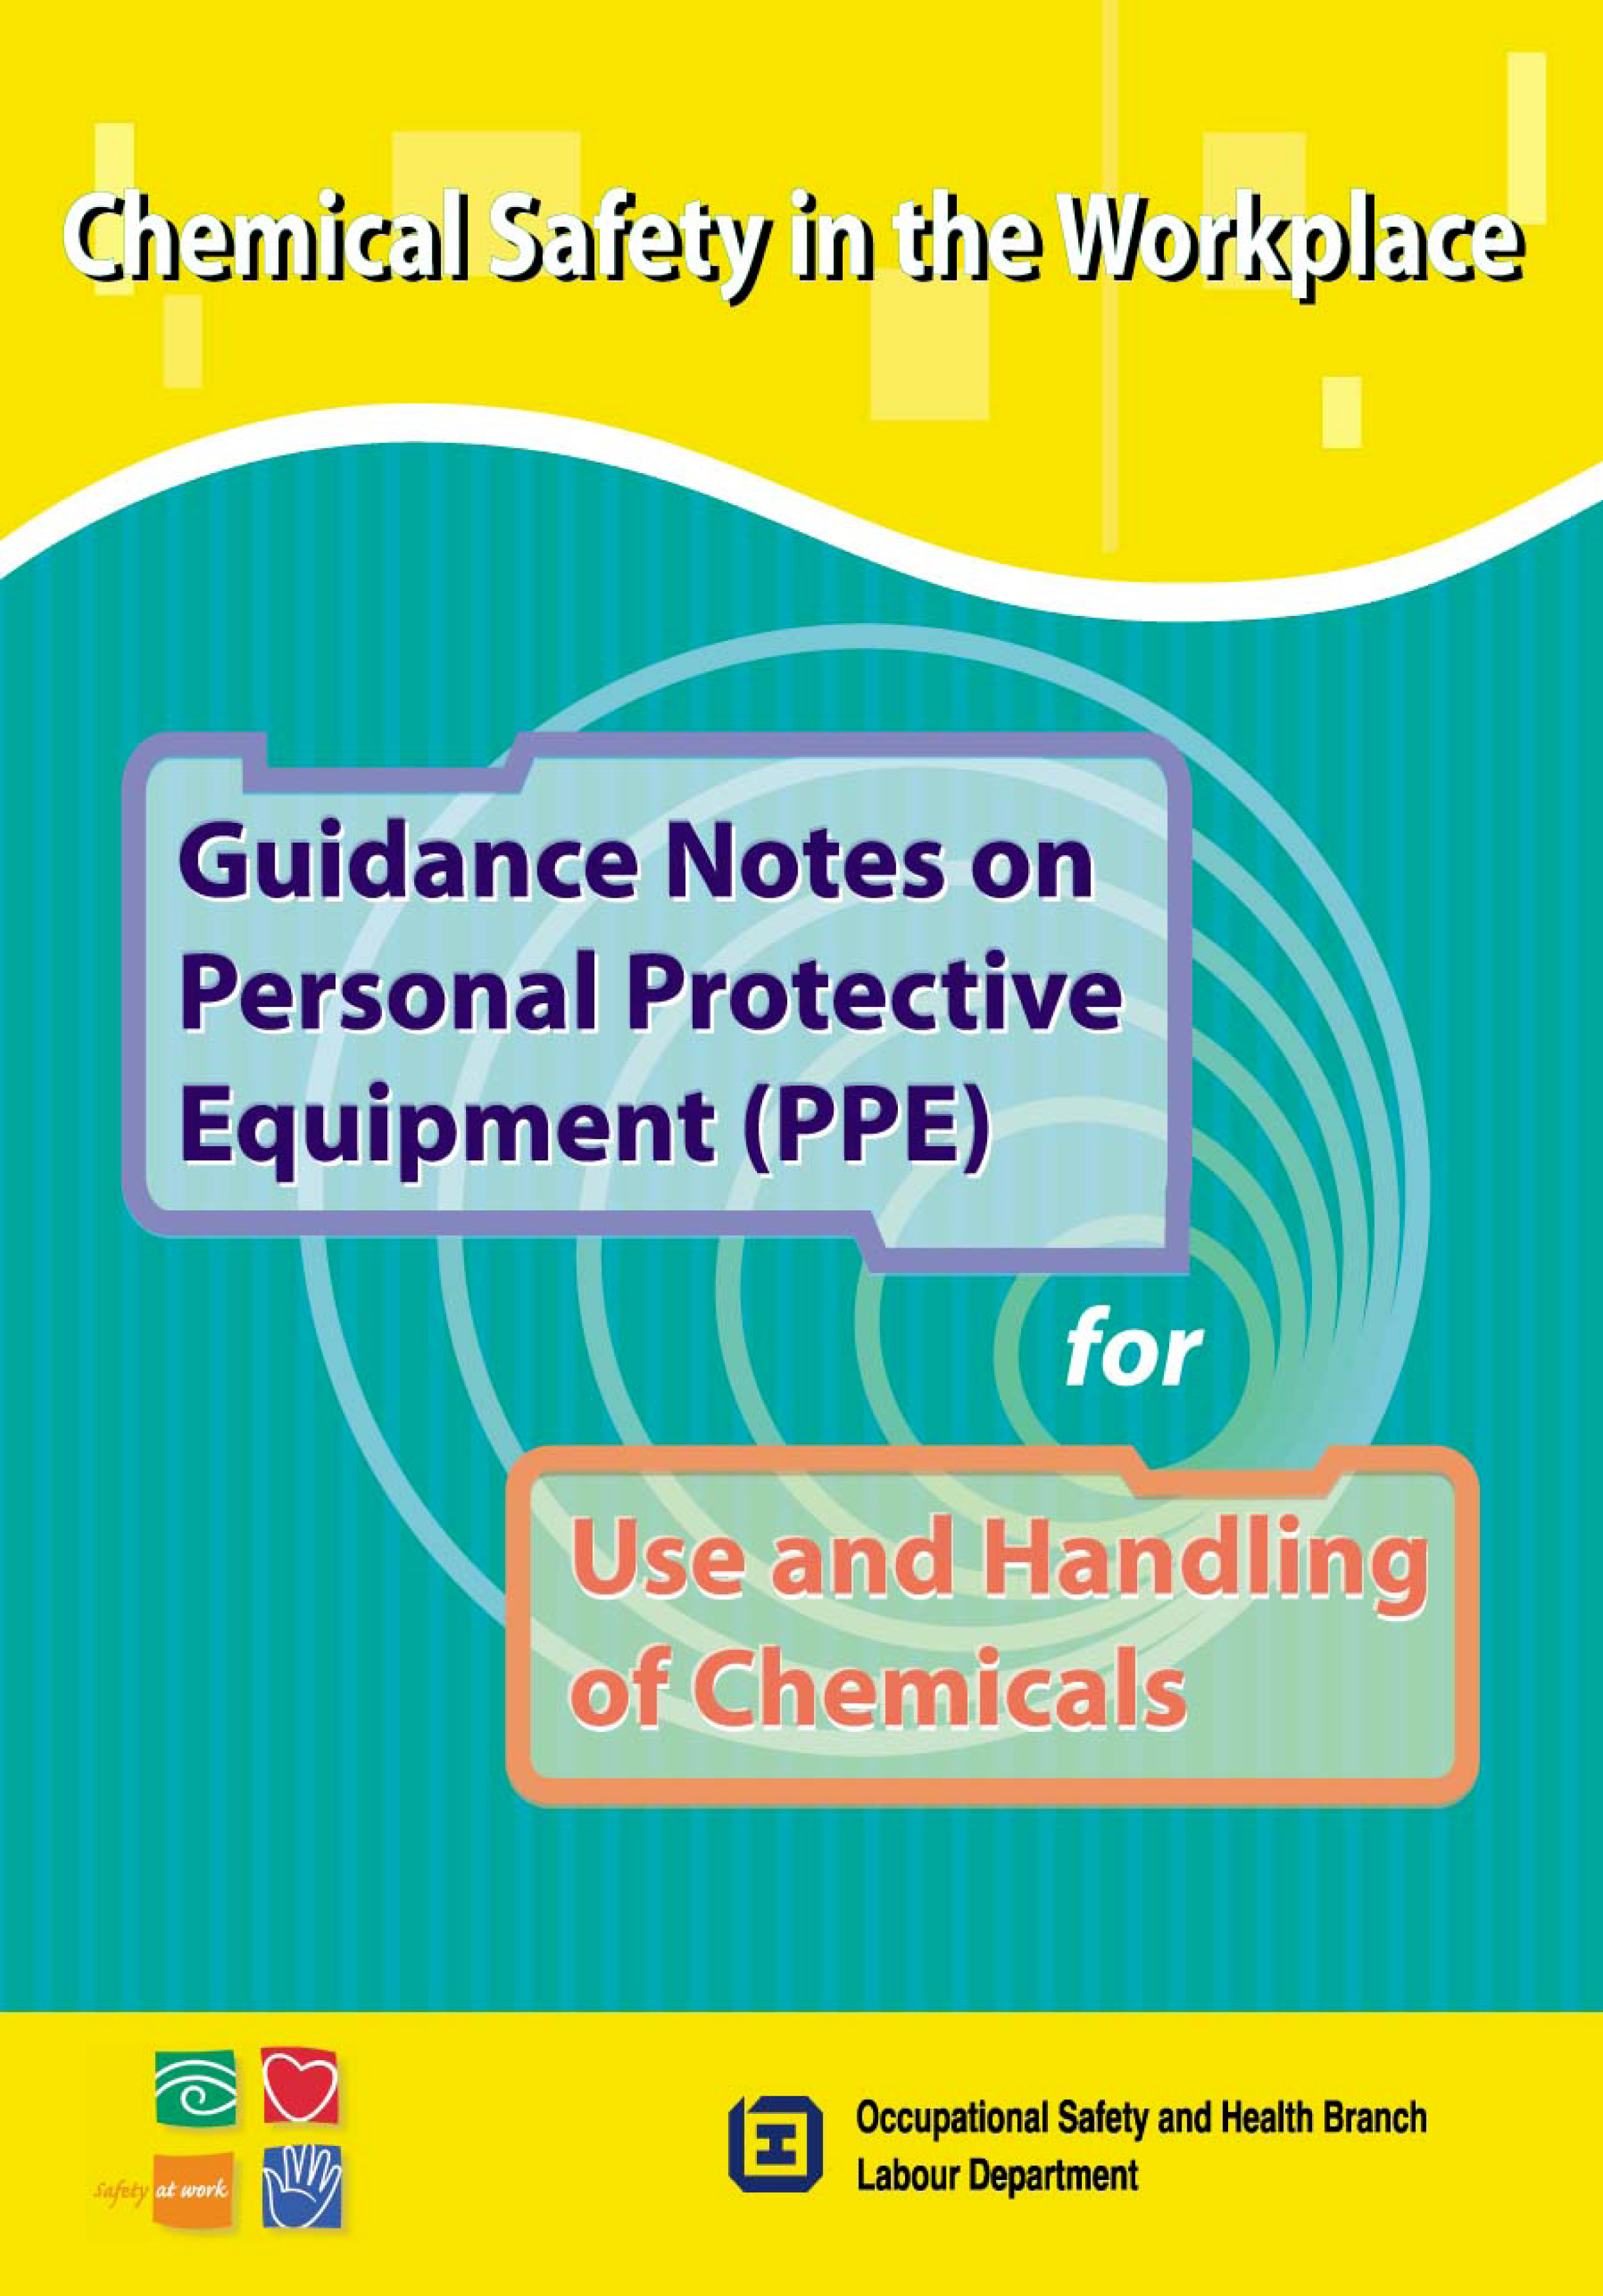 Guidance Notes on Personal Protective Equipment for Use and Handling of Chemicals